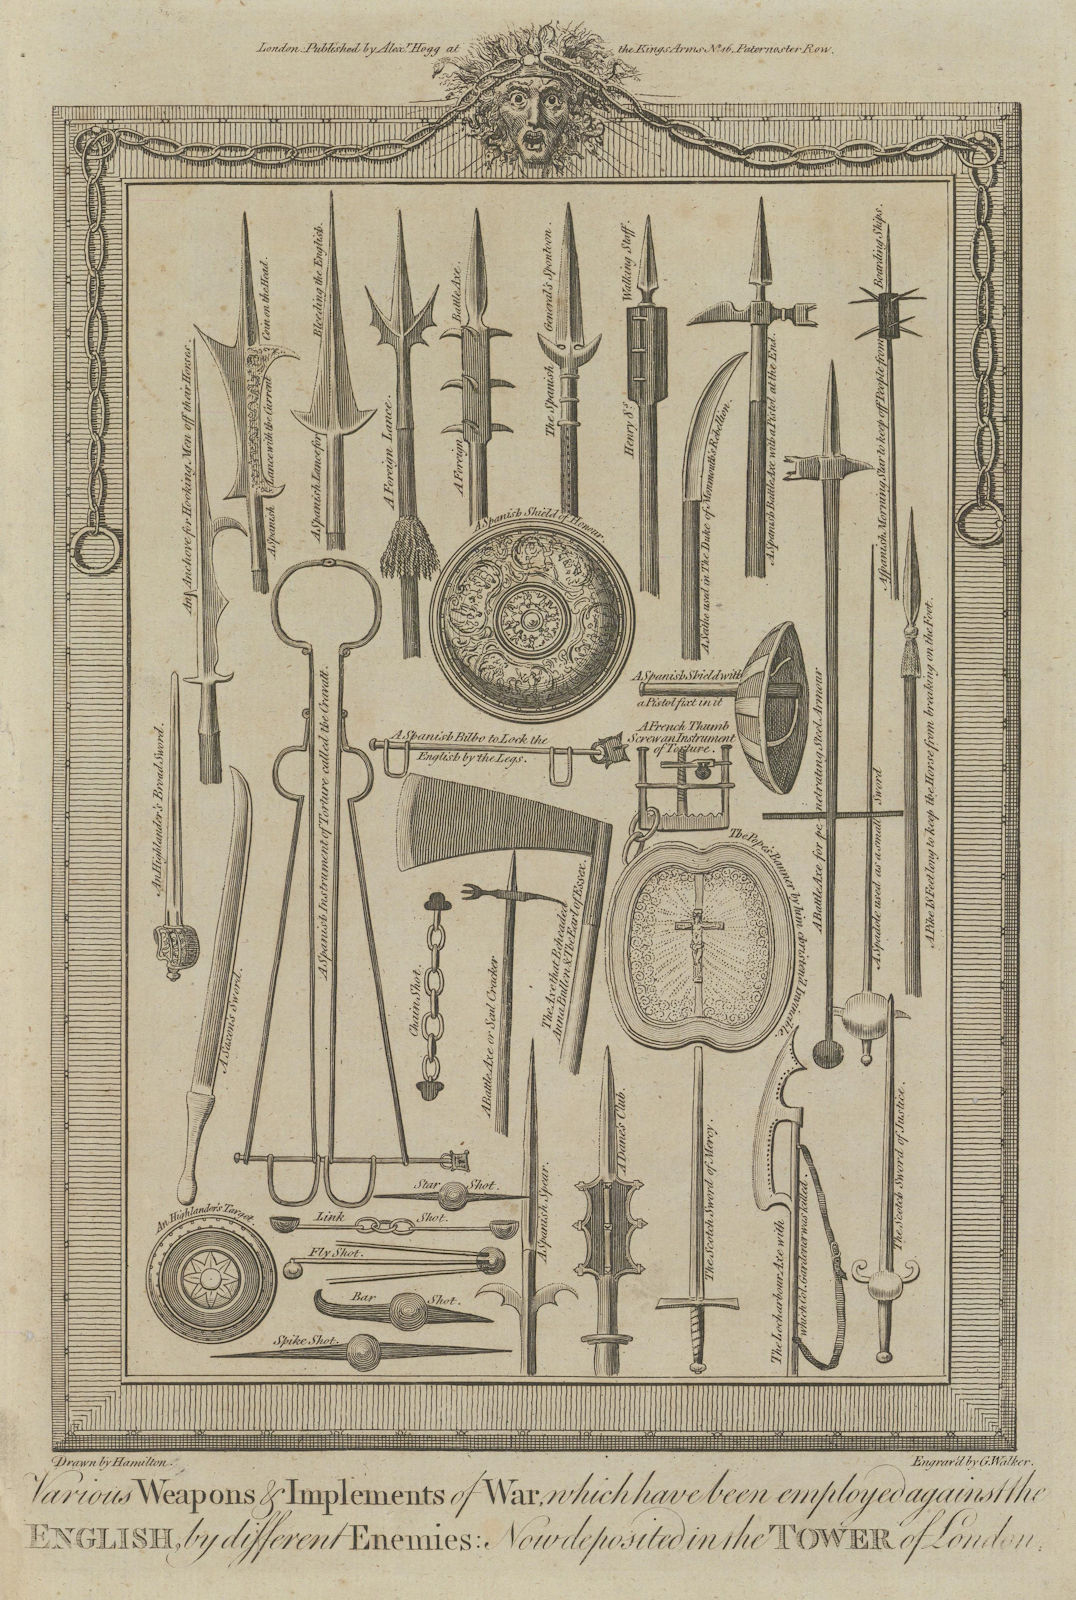 Weapons used by enemies of the English. Tower of London Armoury. THORNTON 1784